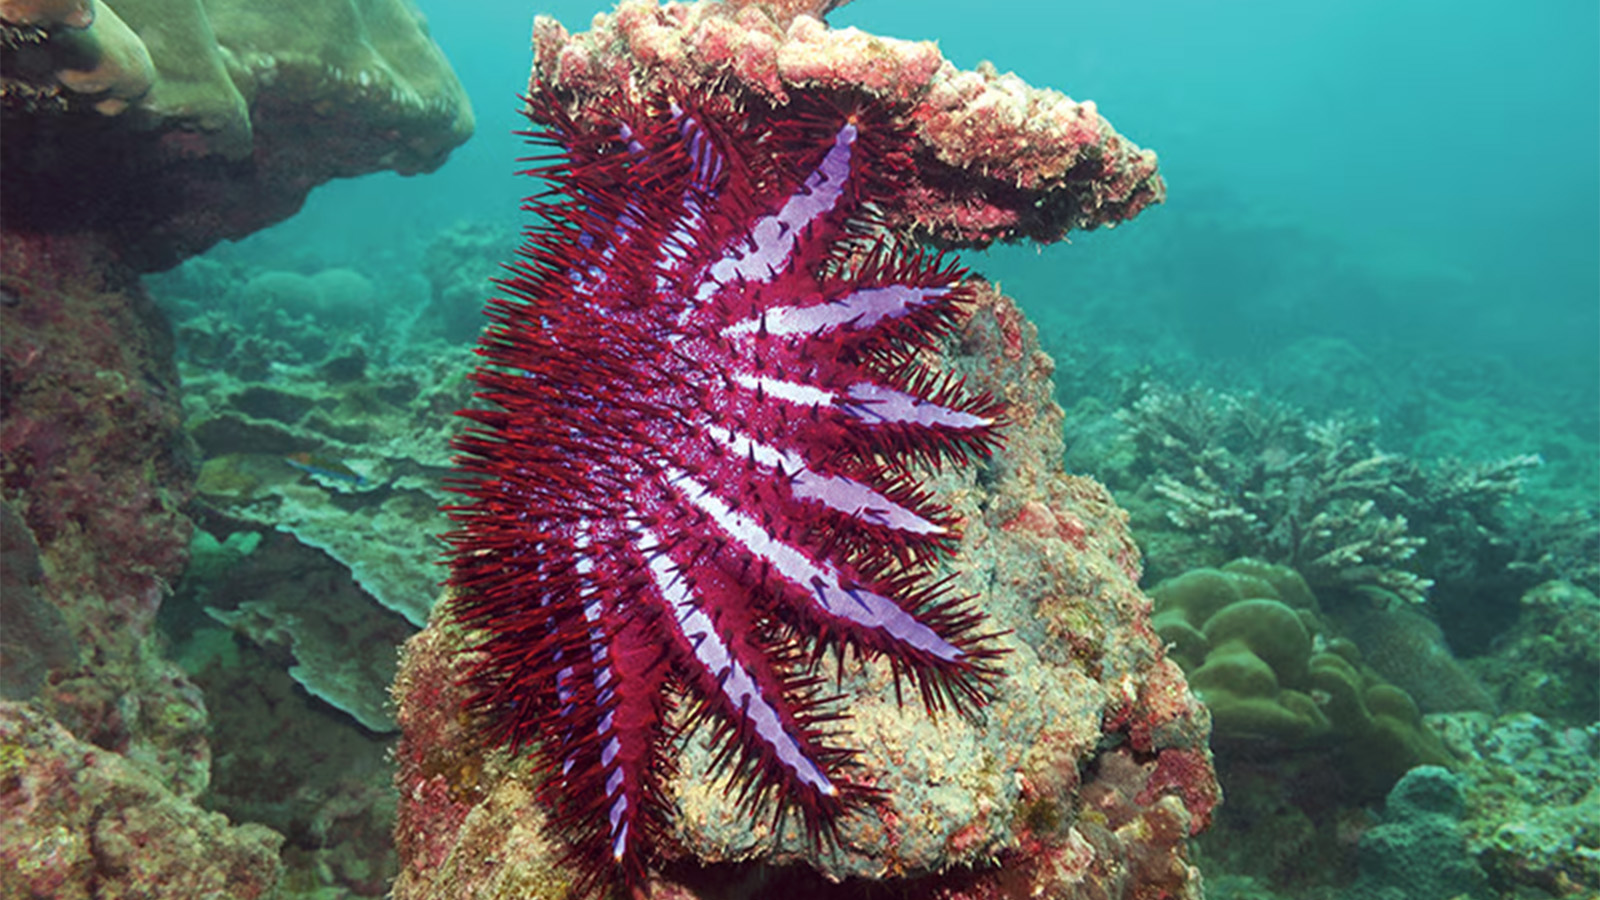 Crown of thorns starfish on coral